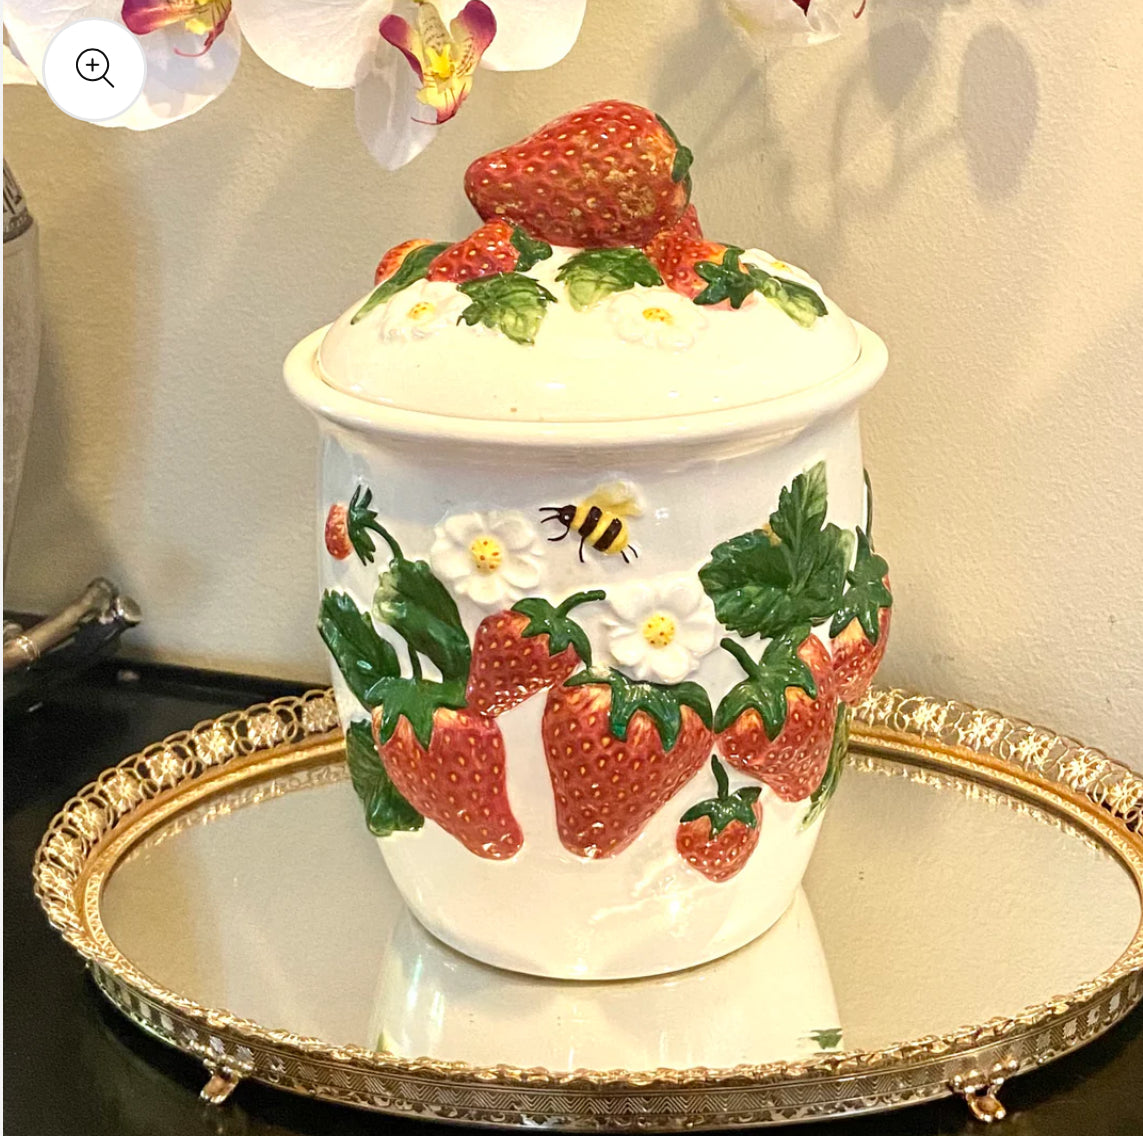 Absolutely adorable large majolica style strawberry cookie jar with lid